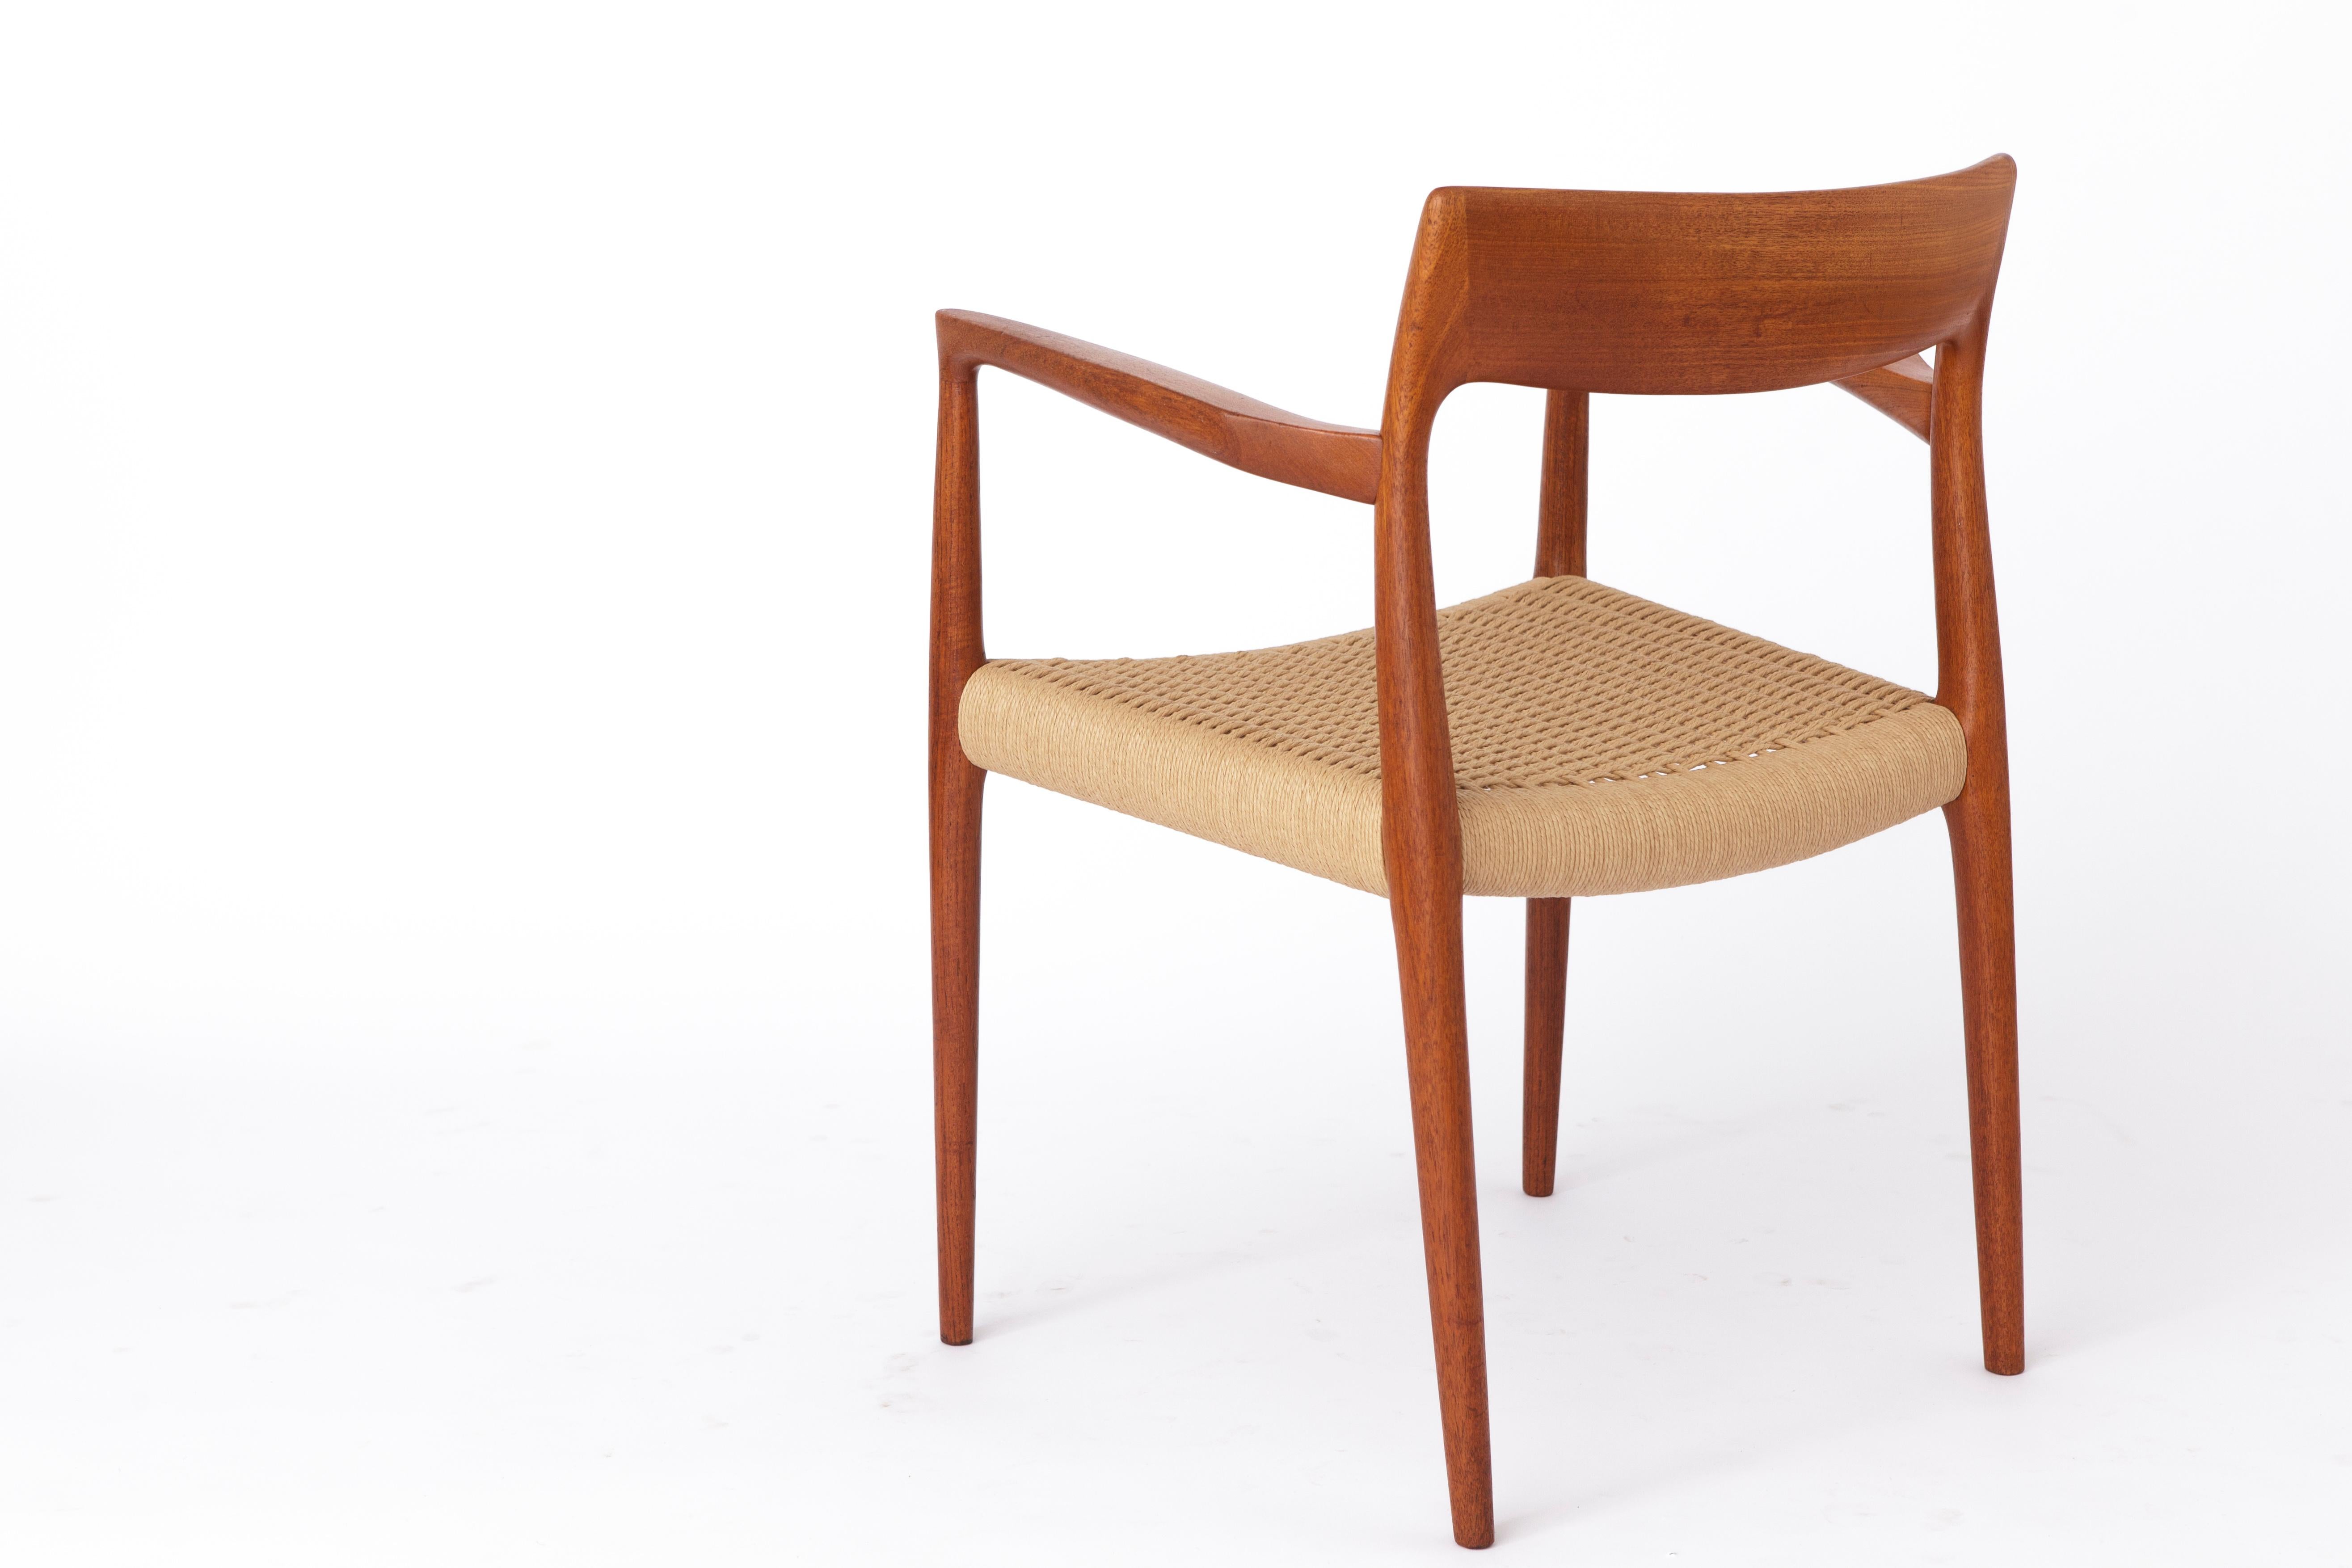 Mid-20th Century Niels Moller armchair, model 57, 1950s Vintage, paper cord seat, dining chair For Sale